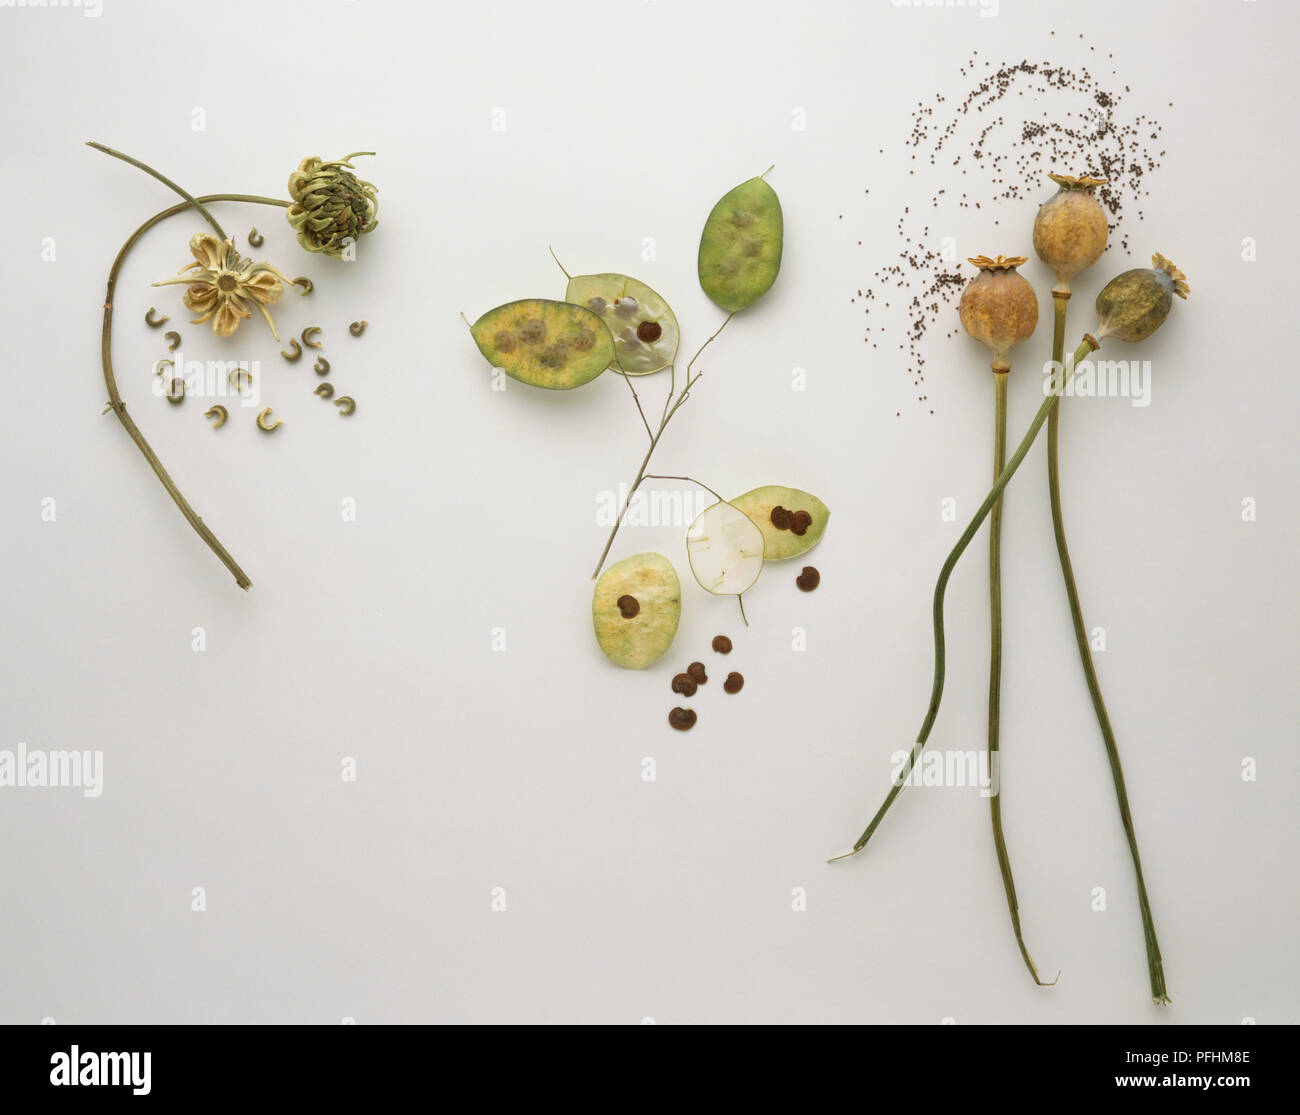 Papaver, Poppy heads and tiny black seeds, Lunaria annua, Honesty, green with brown seeds, Calendula, Marigold flowerheads and scaterred semi-circular seeds. Stock Photo